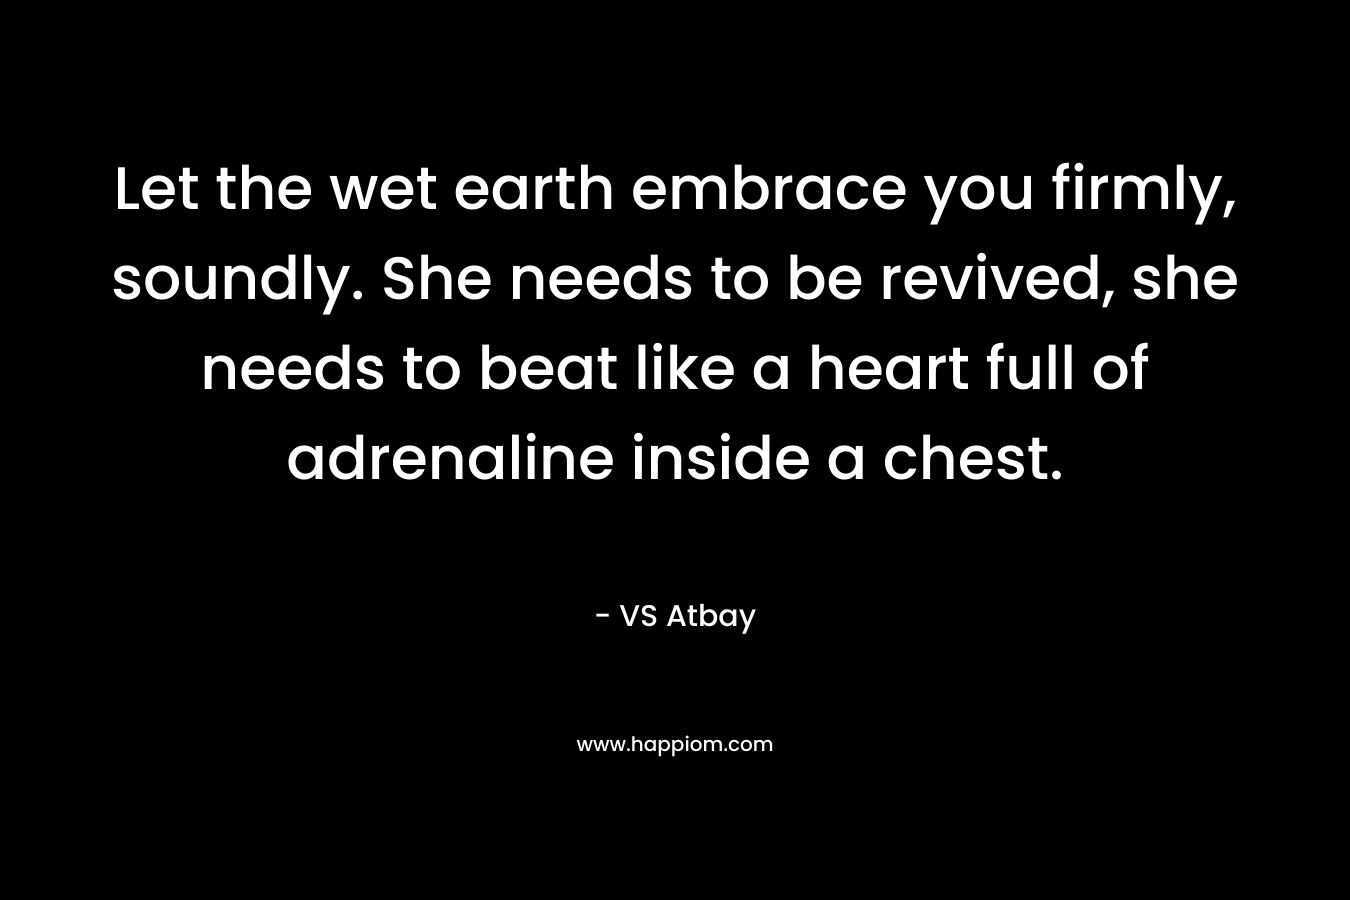 Let the wet earth embrace you firmly, soundly. She needs to be revived, she needs to beat like a heart full of adrenaline inside a chest.